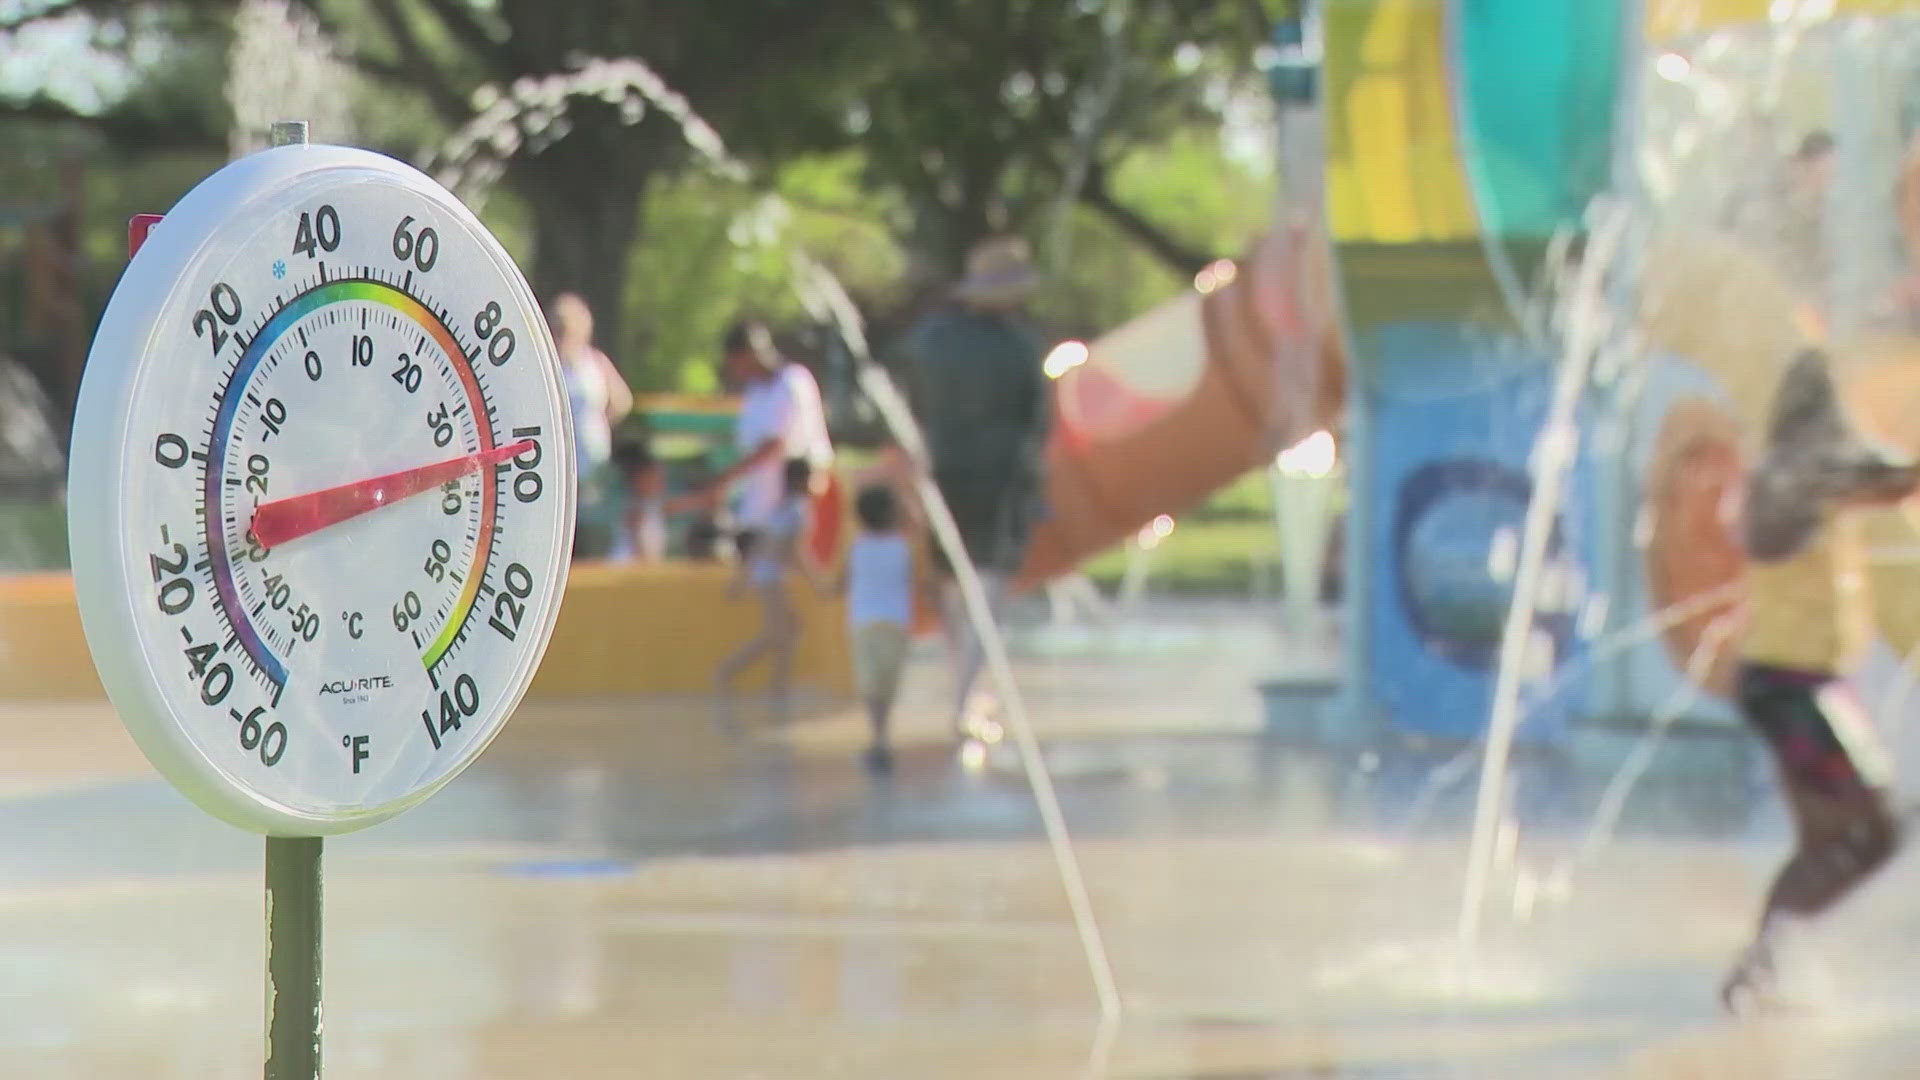 According to the National Weather Service, heat is one of the leading weather-related killers in the U.S. They say heat-related illnesses can happen quickly.